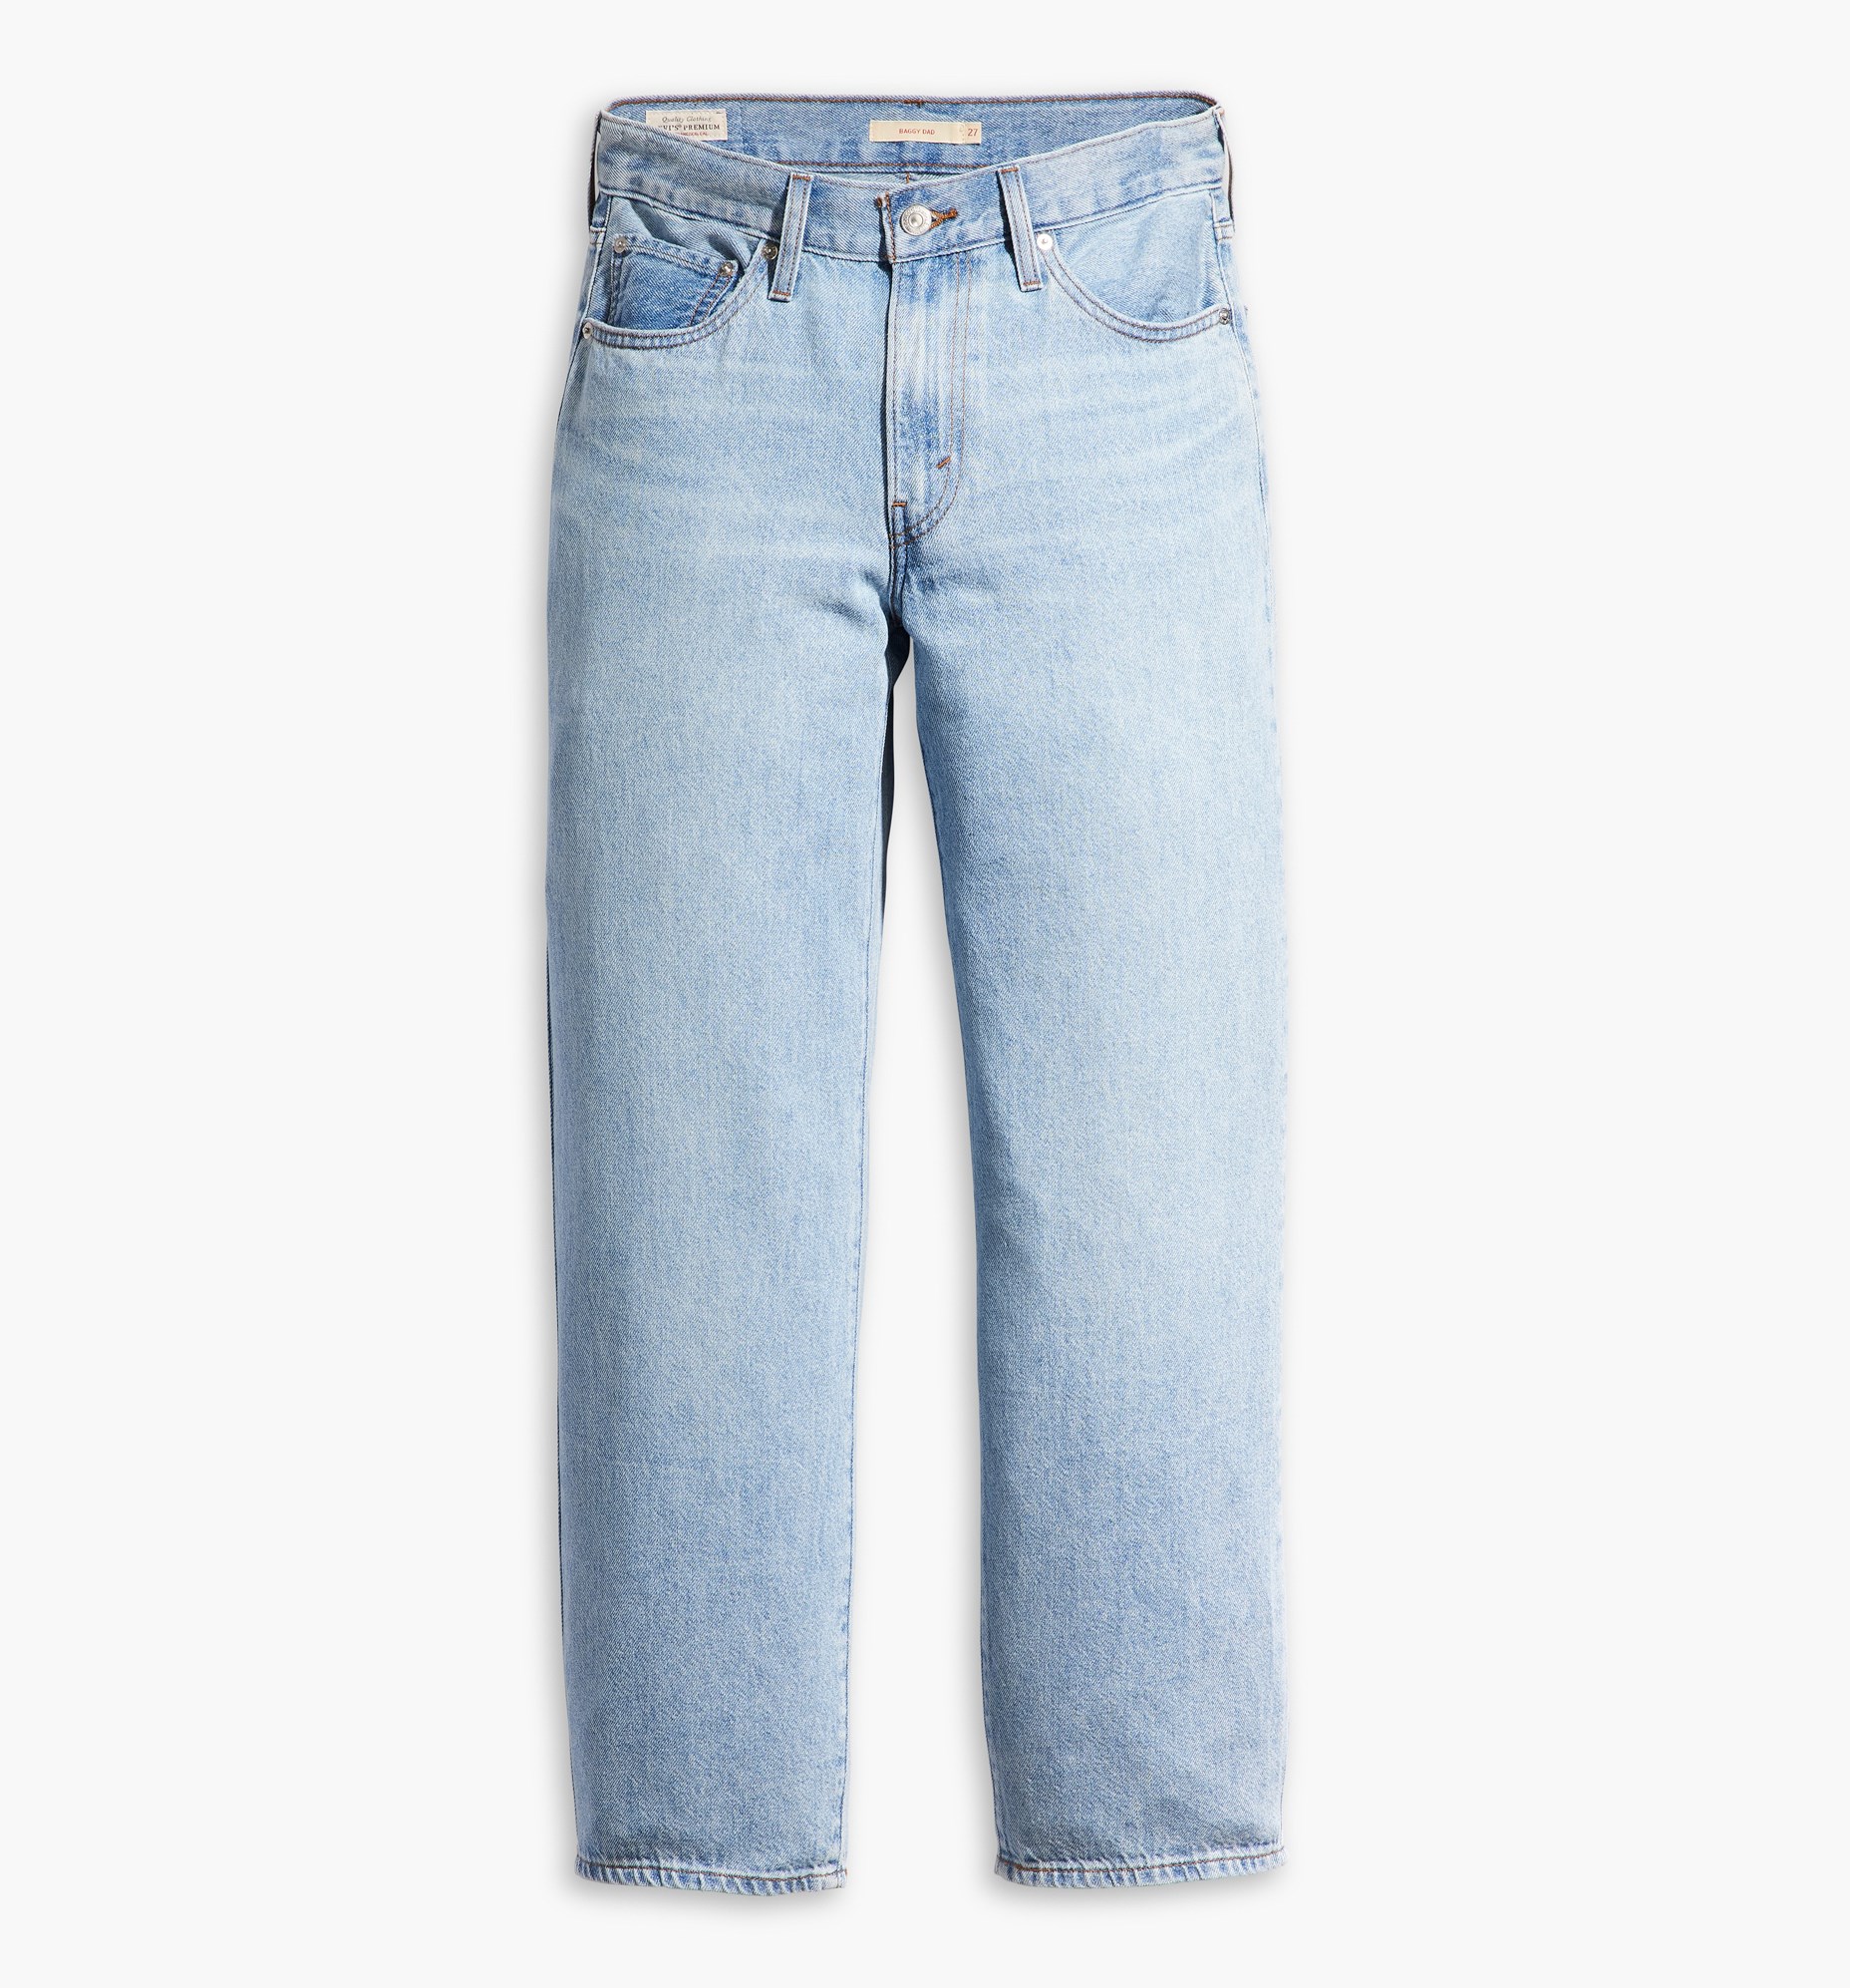 BAGGY DAD LIGHTWEIGHT JEANS